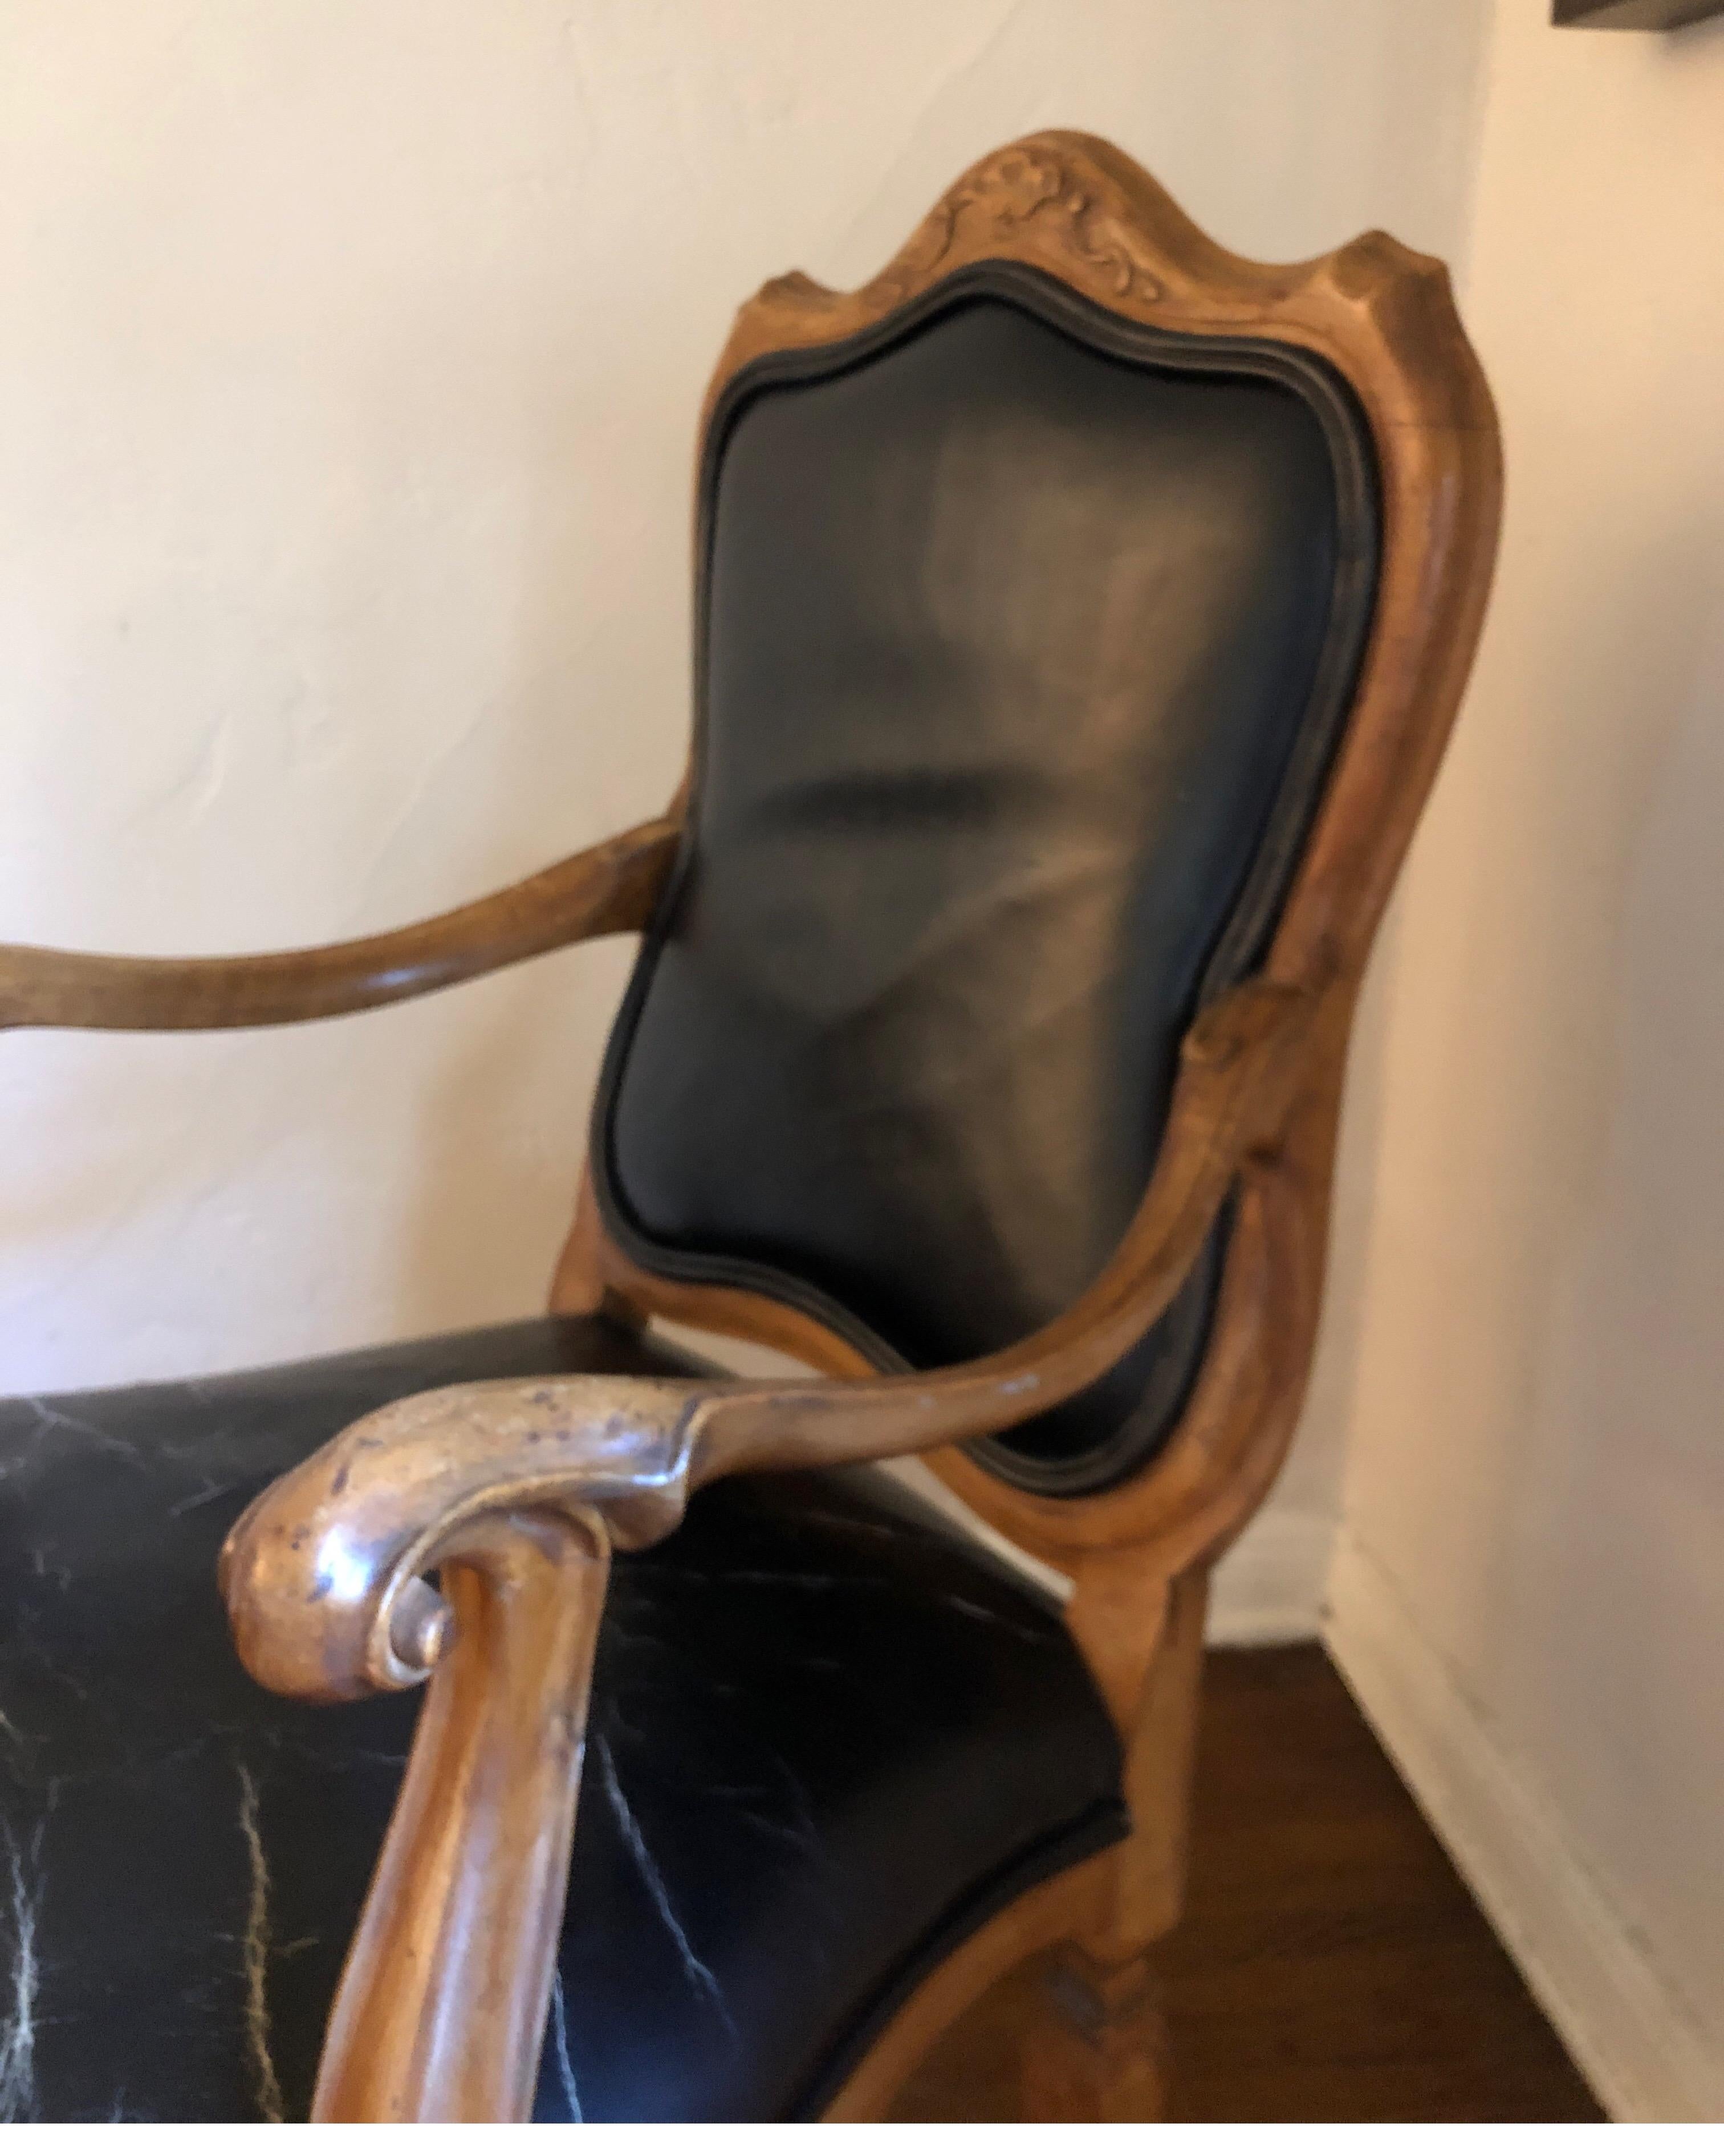 Exceptional carved Venetian style chair made in Italy.
Perfect size for a desk.
Carved details along the back and chunky curved grip on hand-rest.
Black leather upholstery has heavy wear on seat cushion. 

Very structural in modern setting.